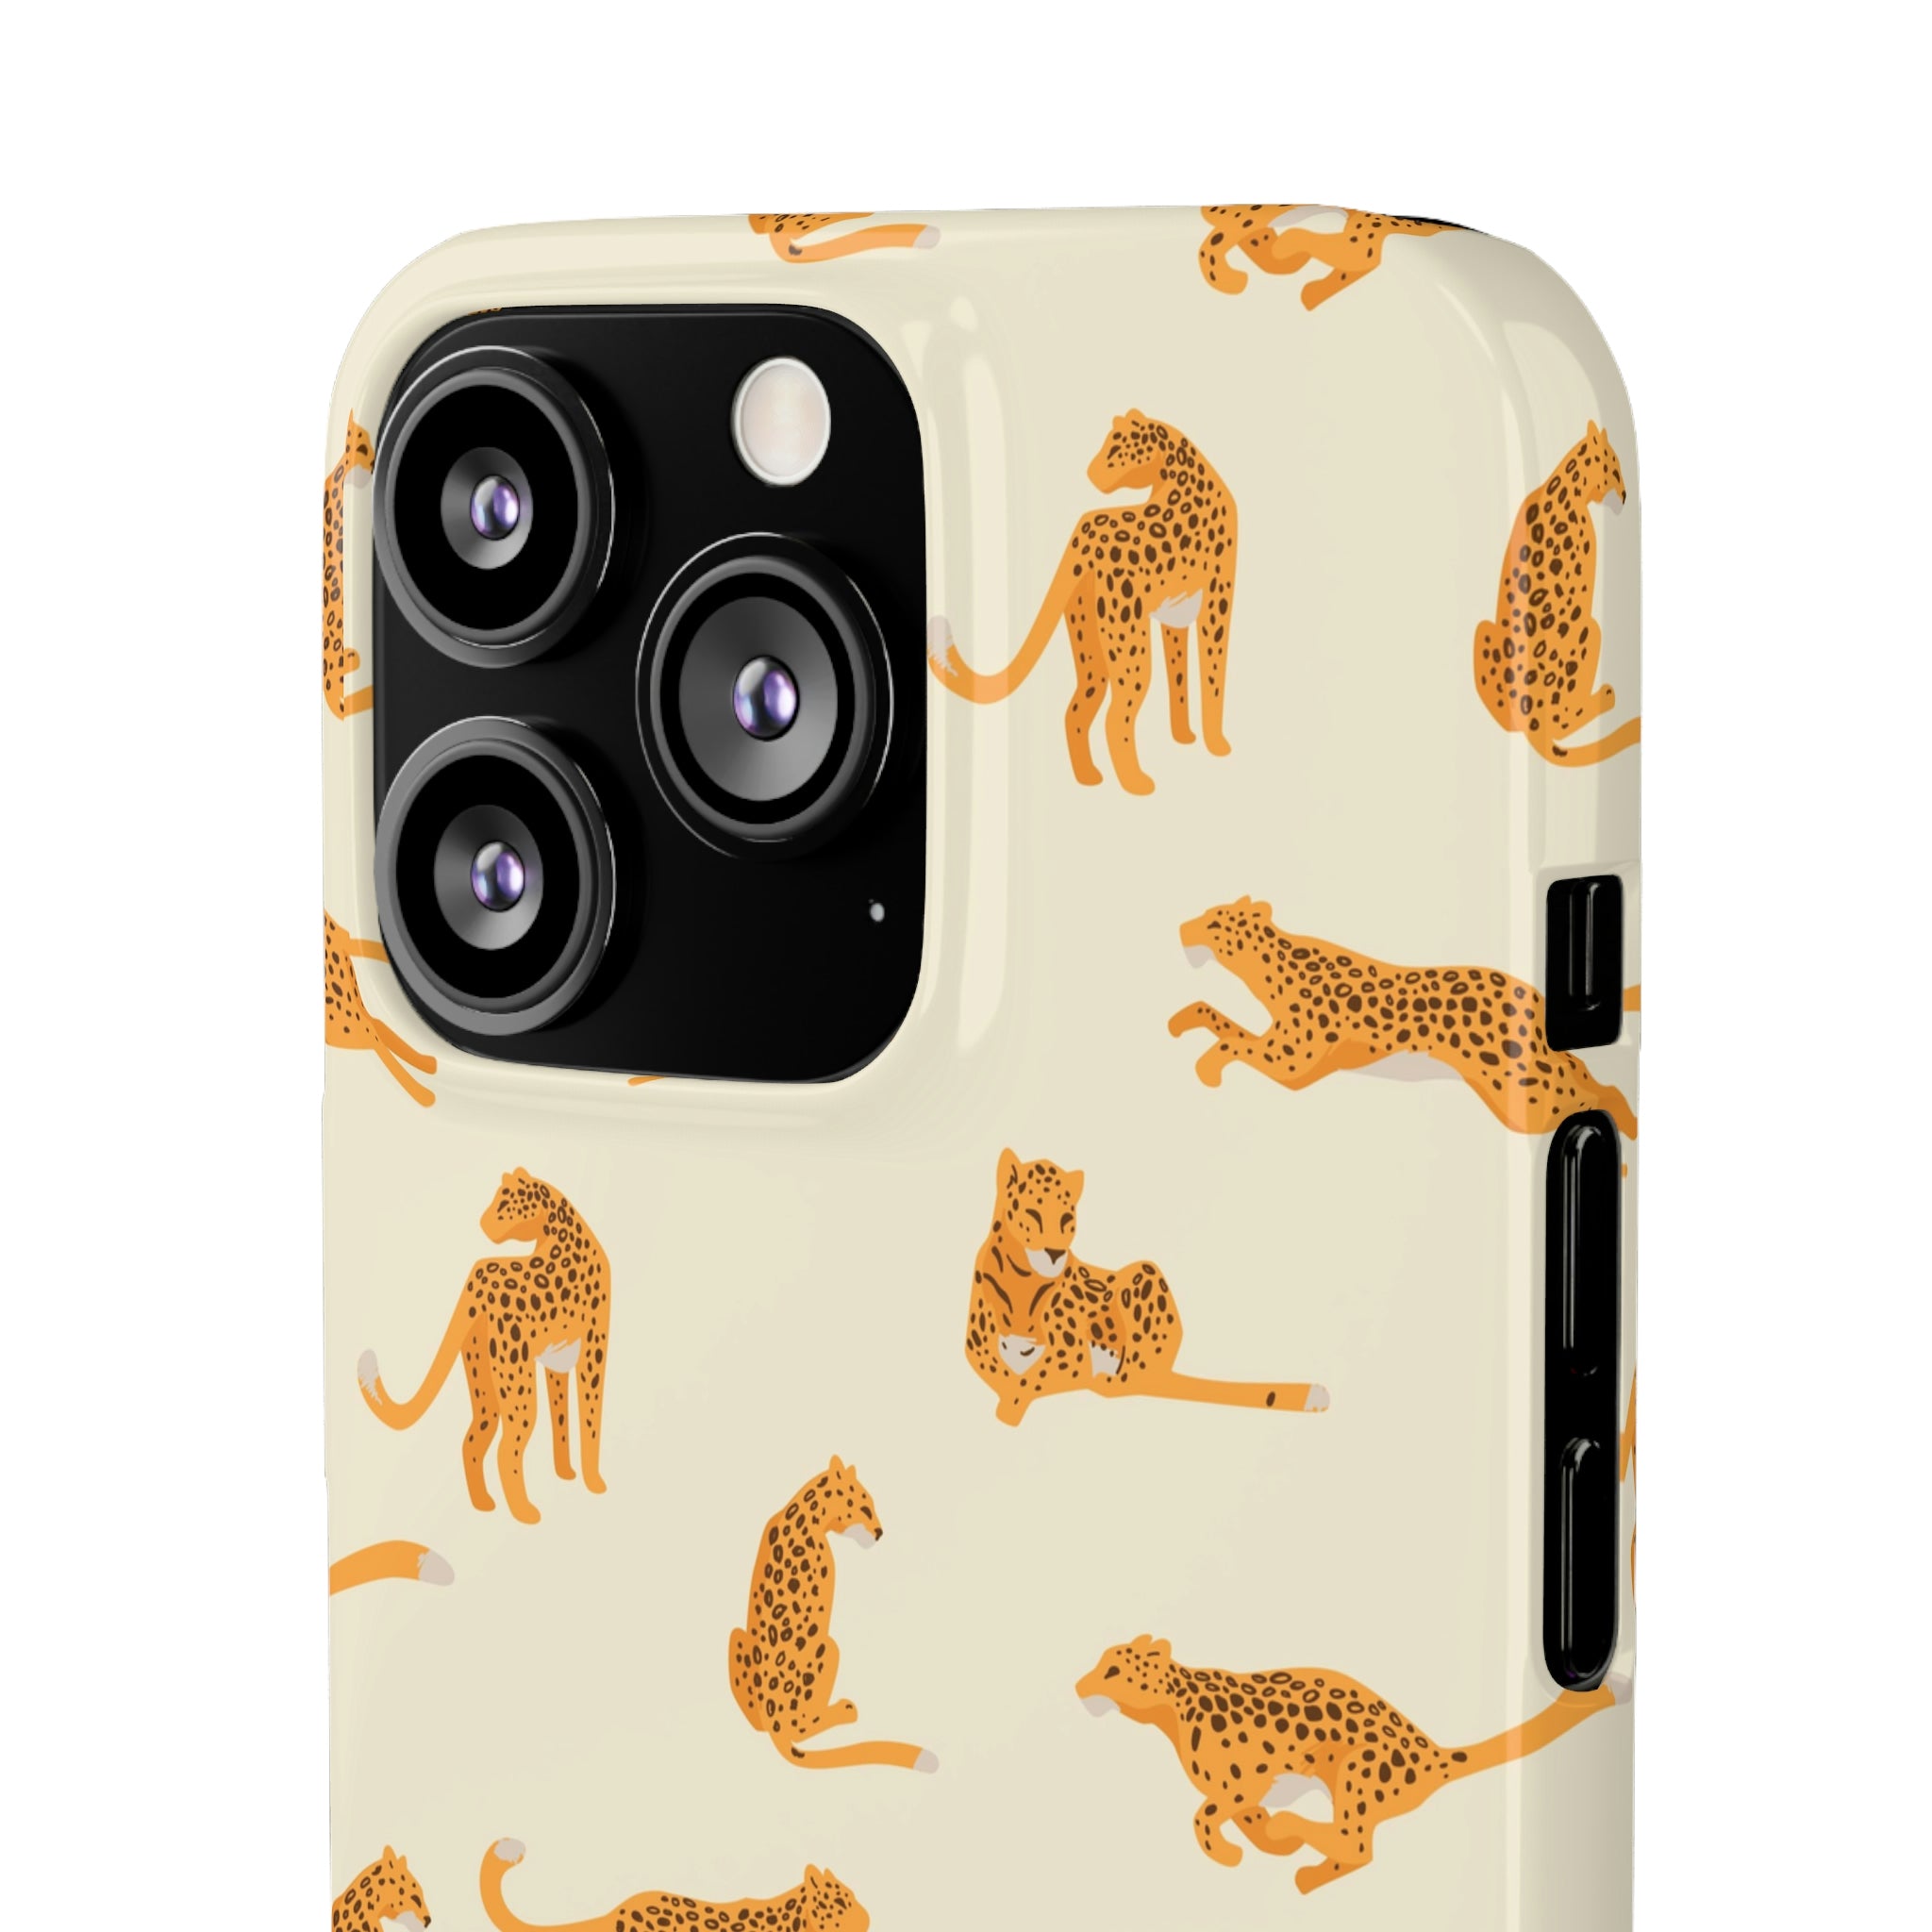 Leopard Prowl - Day - Snap Case